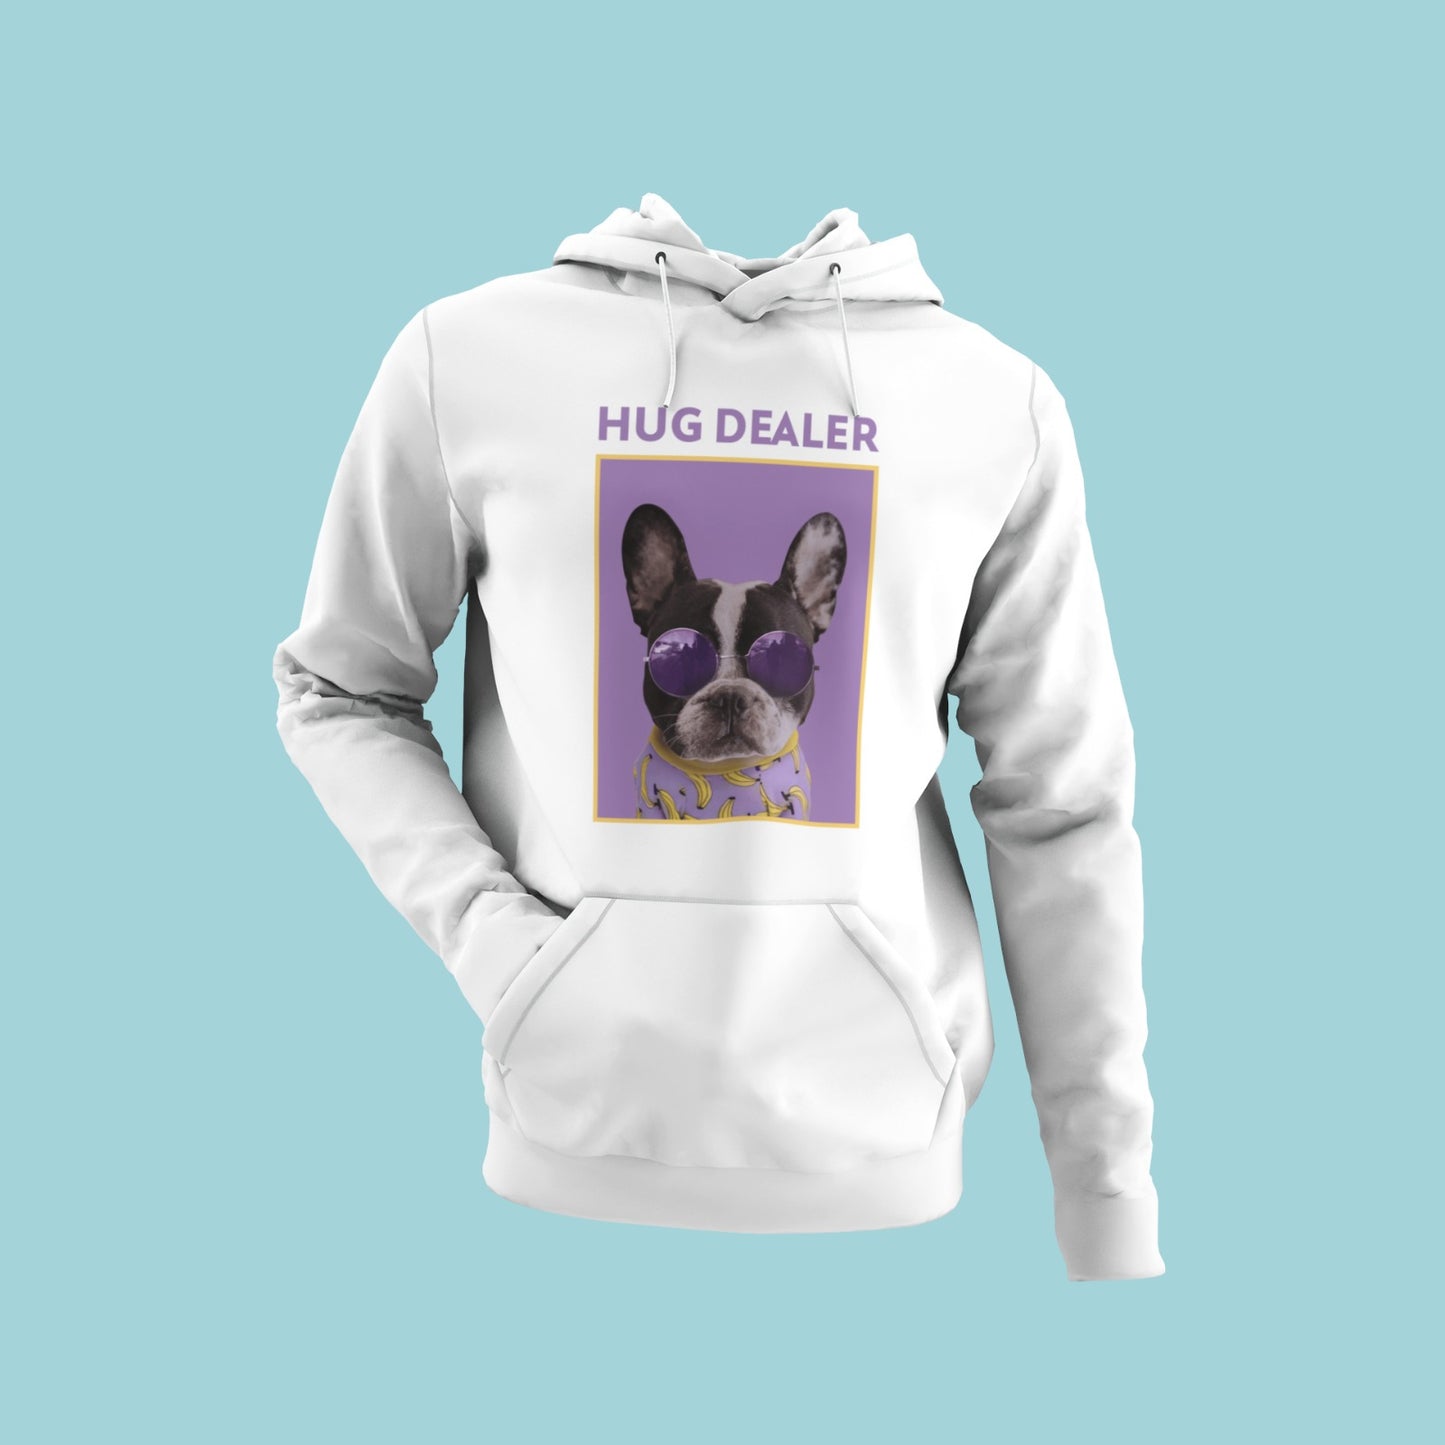 Introducing our "Hug Dealer" white hoodie featuring a cool Boston Terrier wearing purple sunglasses. Spread some love with this stylish and comfortable hoodie. Perfect for dog lovers, this hoodie will be your new favorite for all occasions. Get ready to be hugged with compliments! Available now!